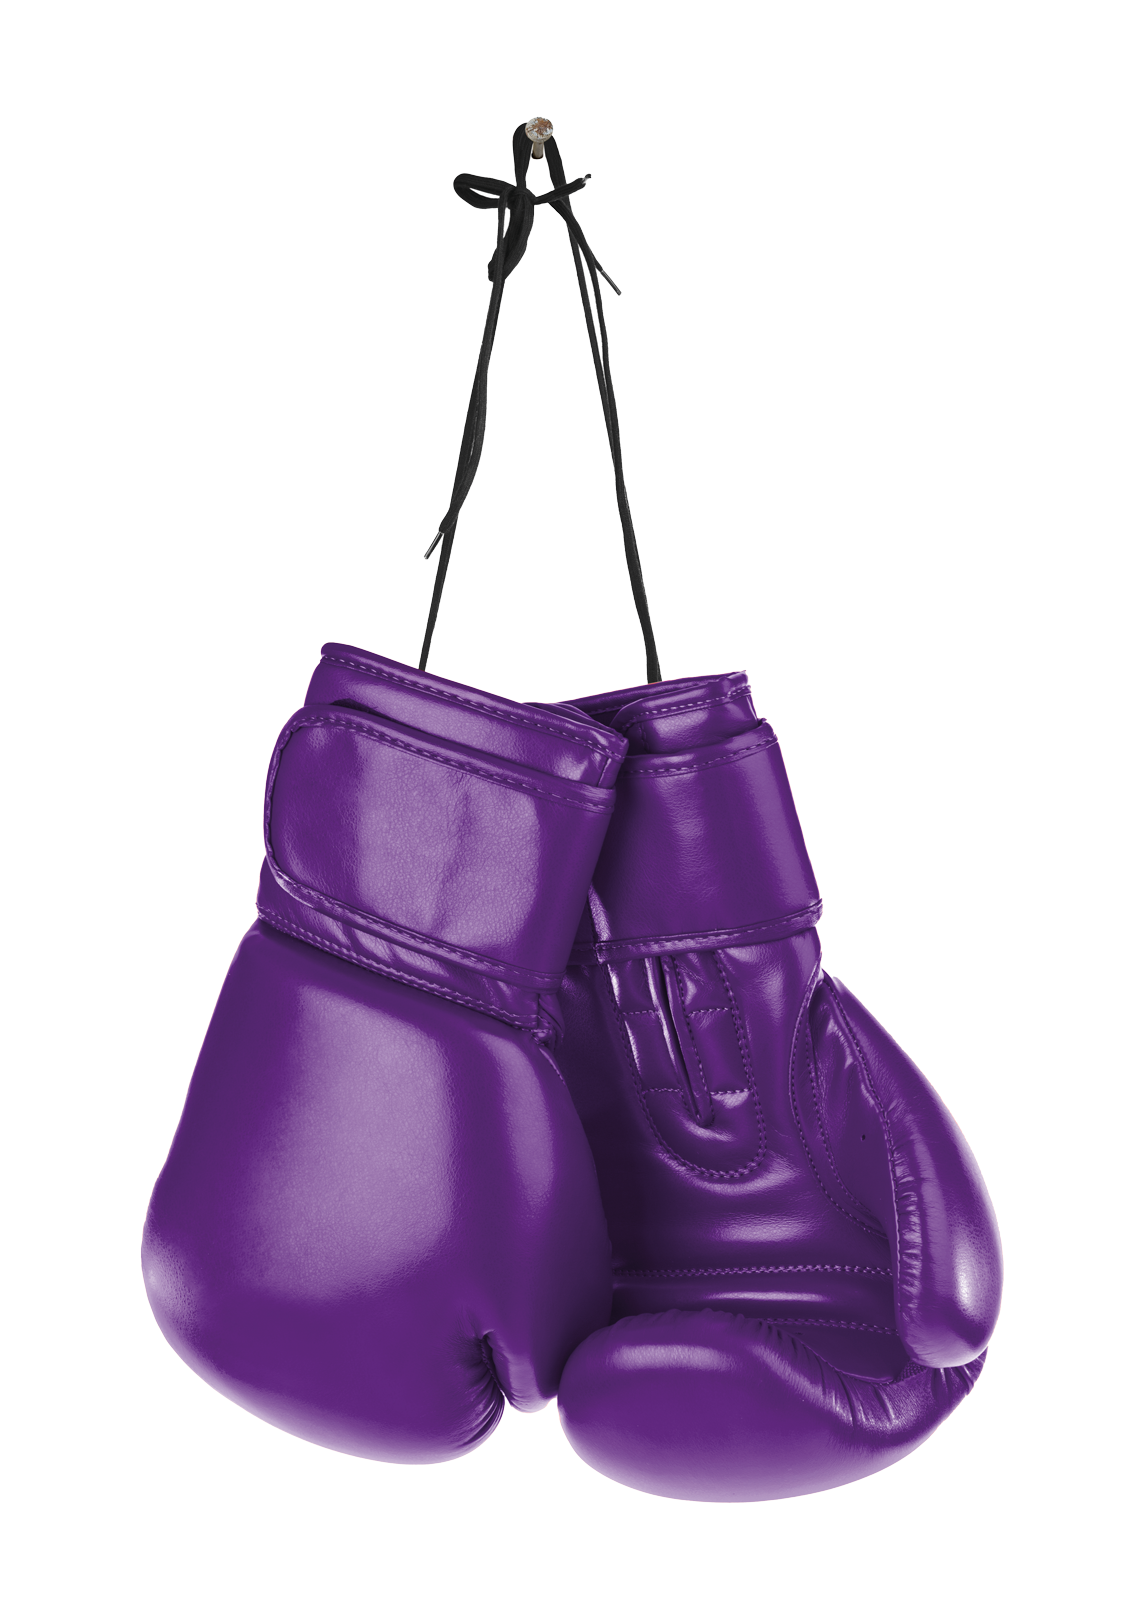 A set of purple boxing gloves hangs from a nail in the wall